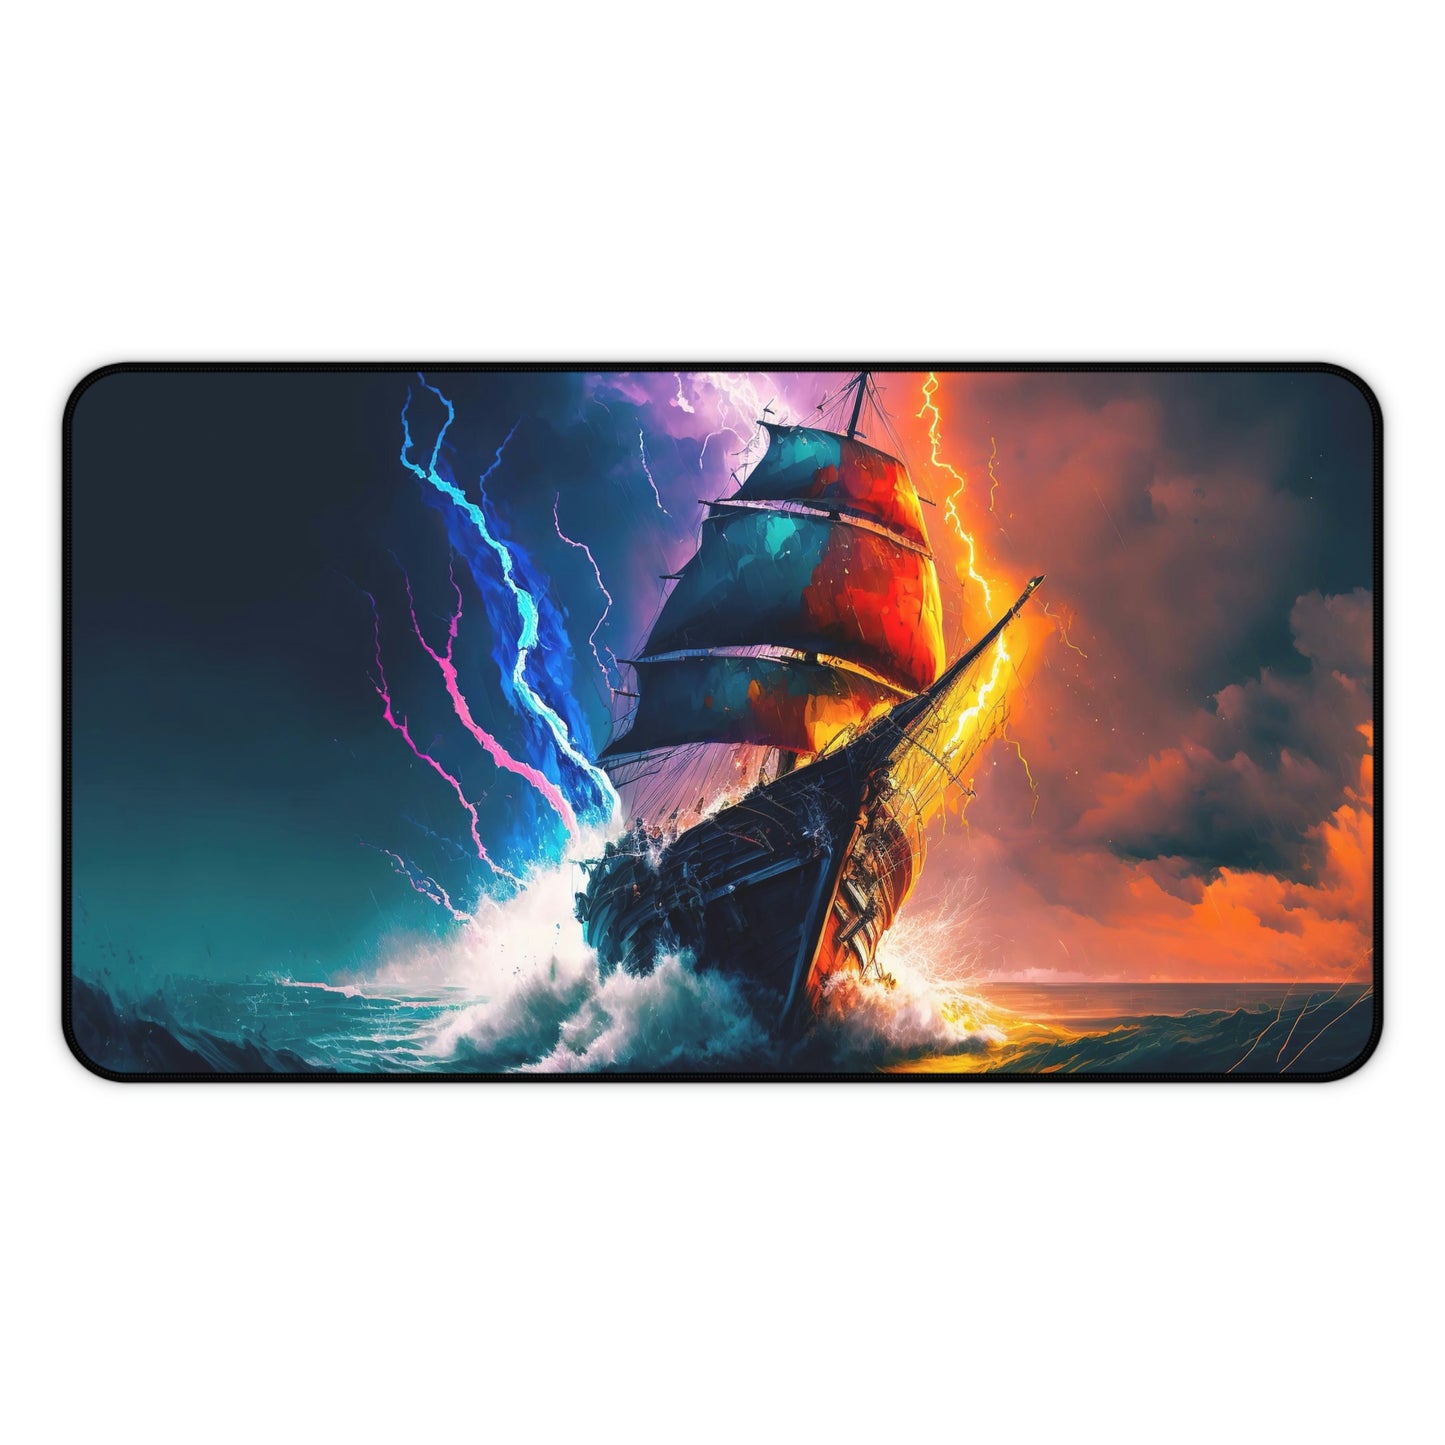 Colorful Boat Gaming Mouse Pad